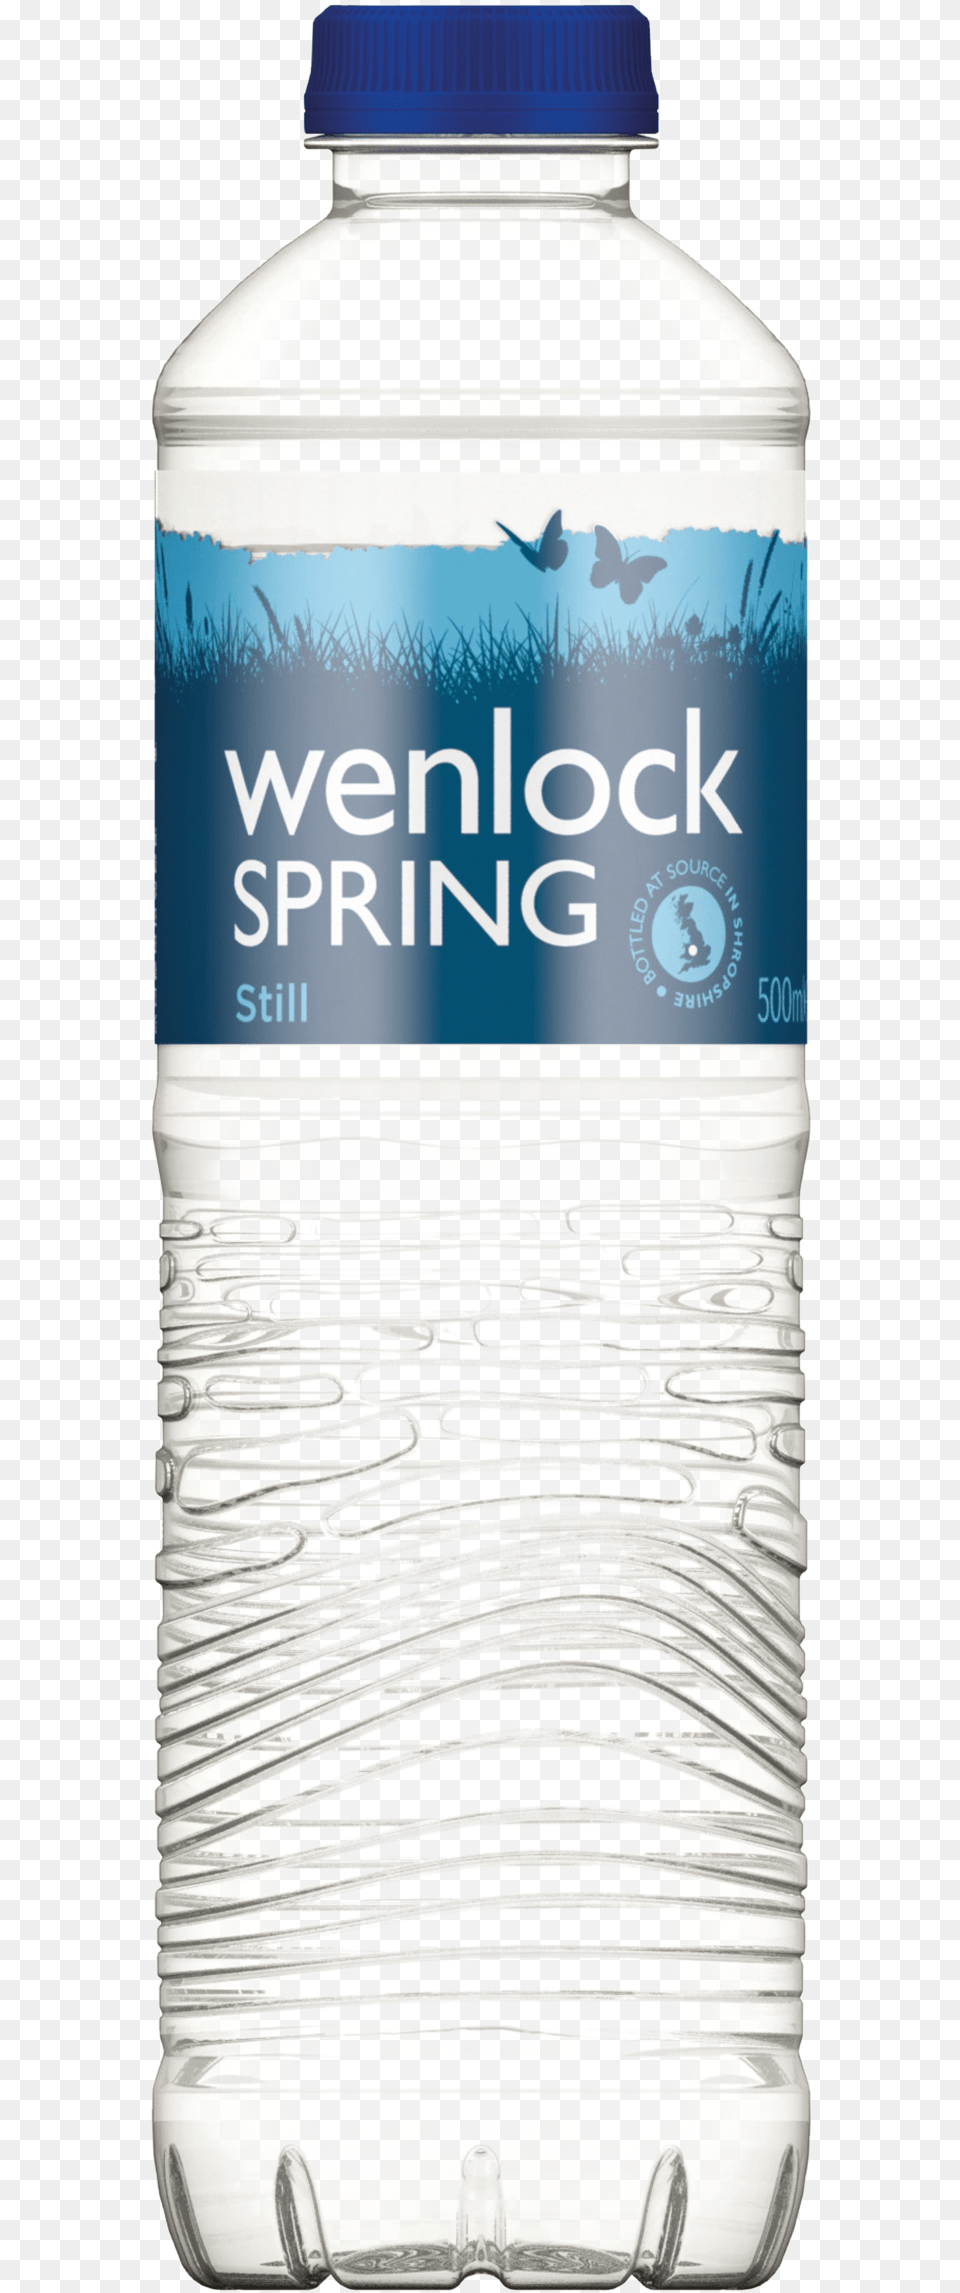 They Are Delighted To Be Sponsoring This Fantastic Wenlock Spring Water Ltd, Bottle, Water Bottle, Beverage, Mineral Water Png